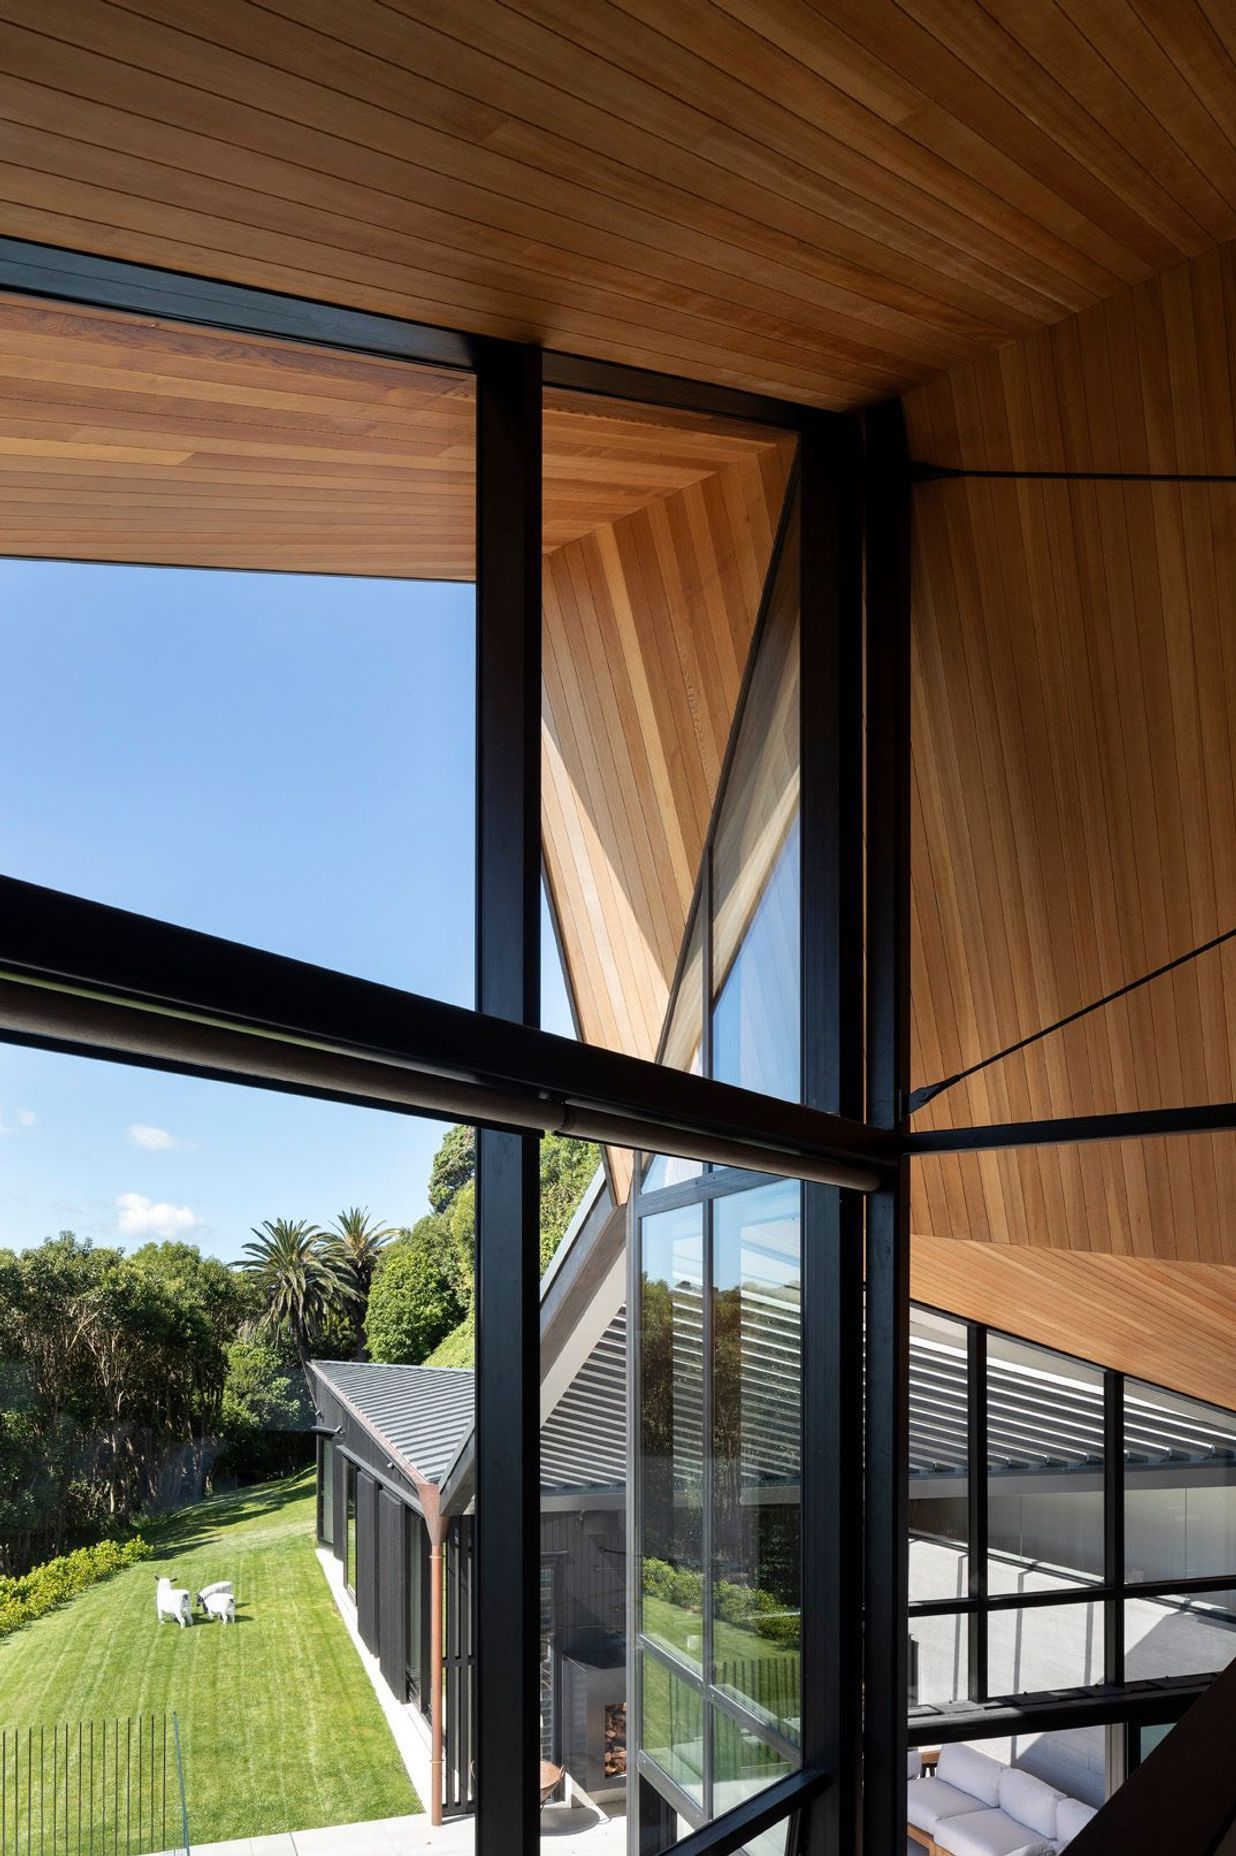 From the mezzanine main bedroom, the roof form is a big gesture, in the scale of the cliff, embracing the house and defined by the folds of the faceted ceiling.